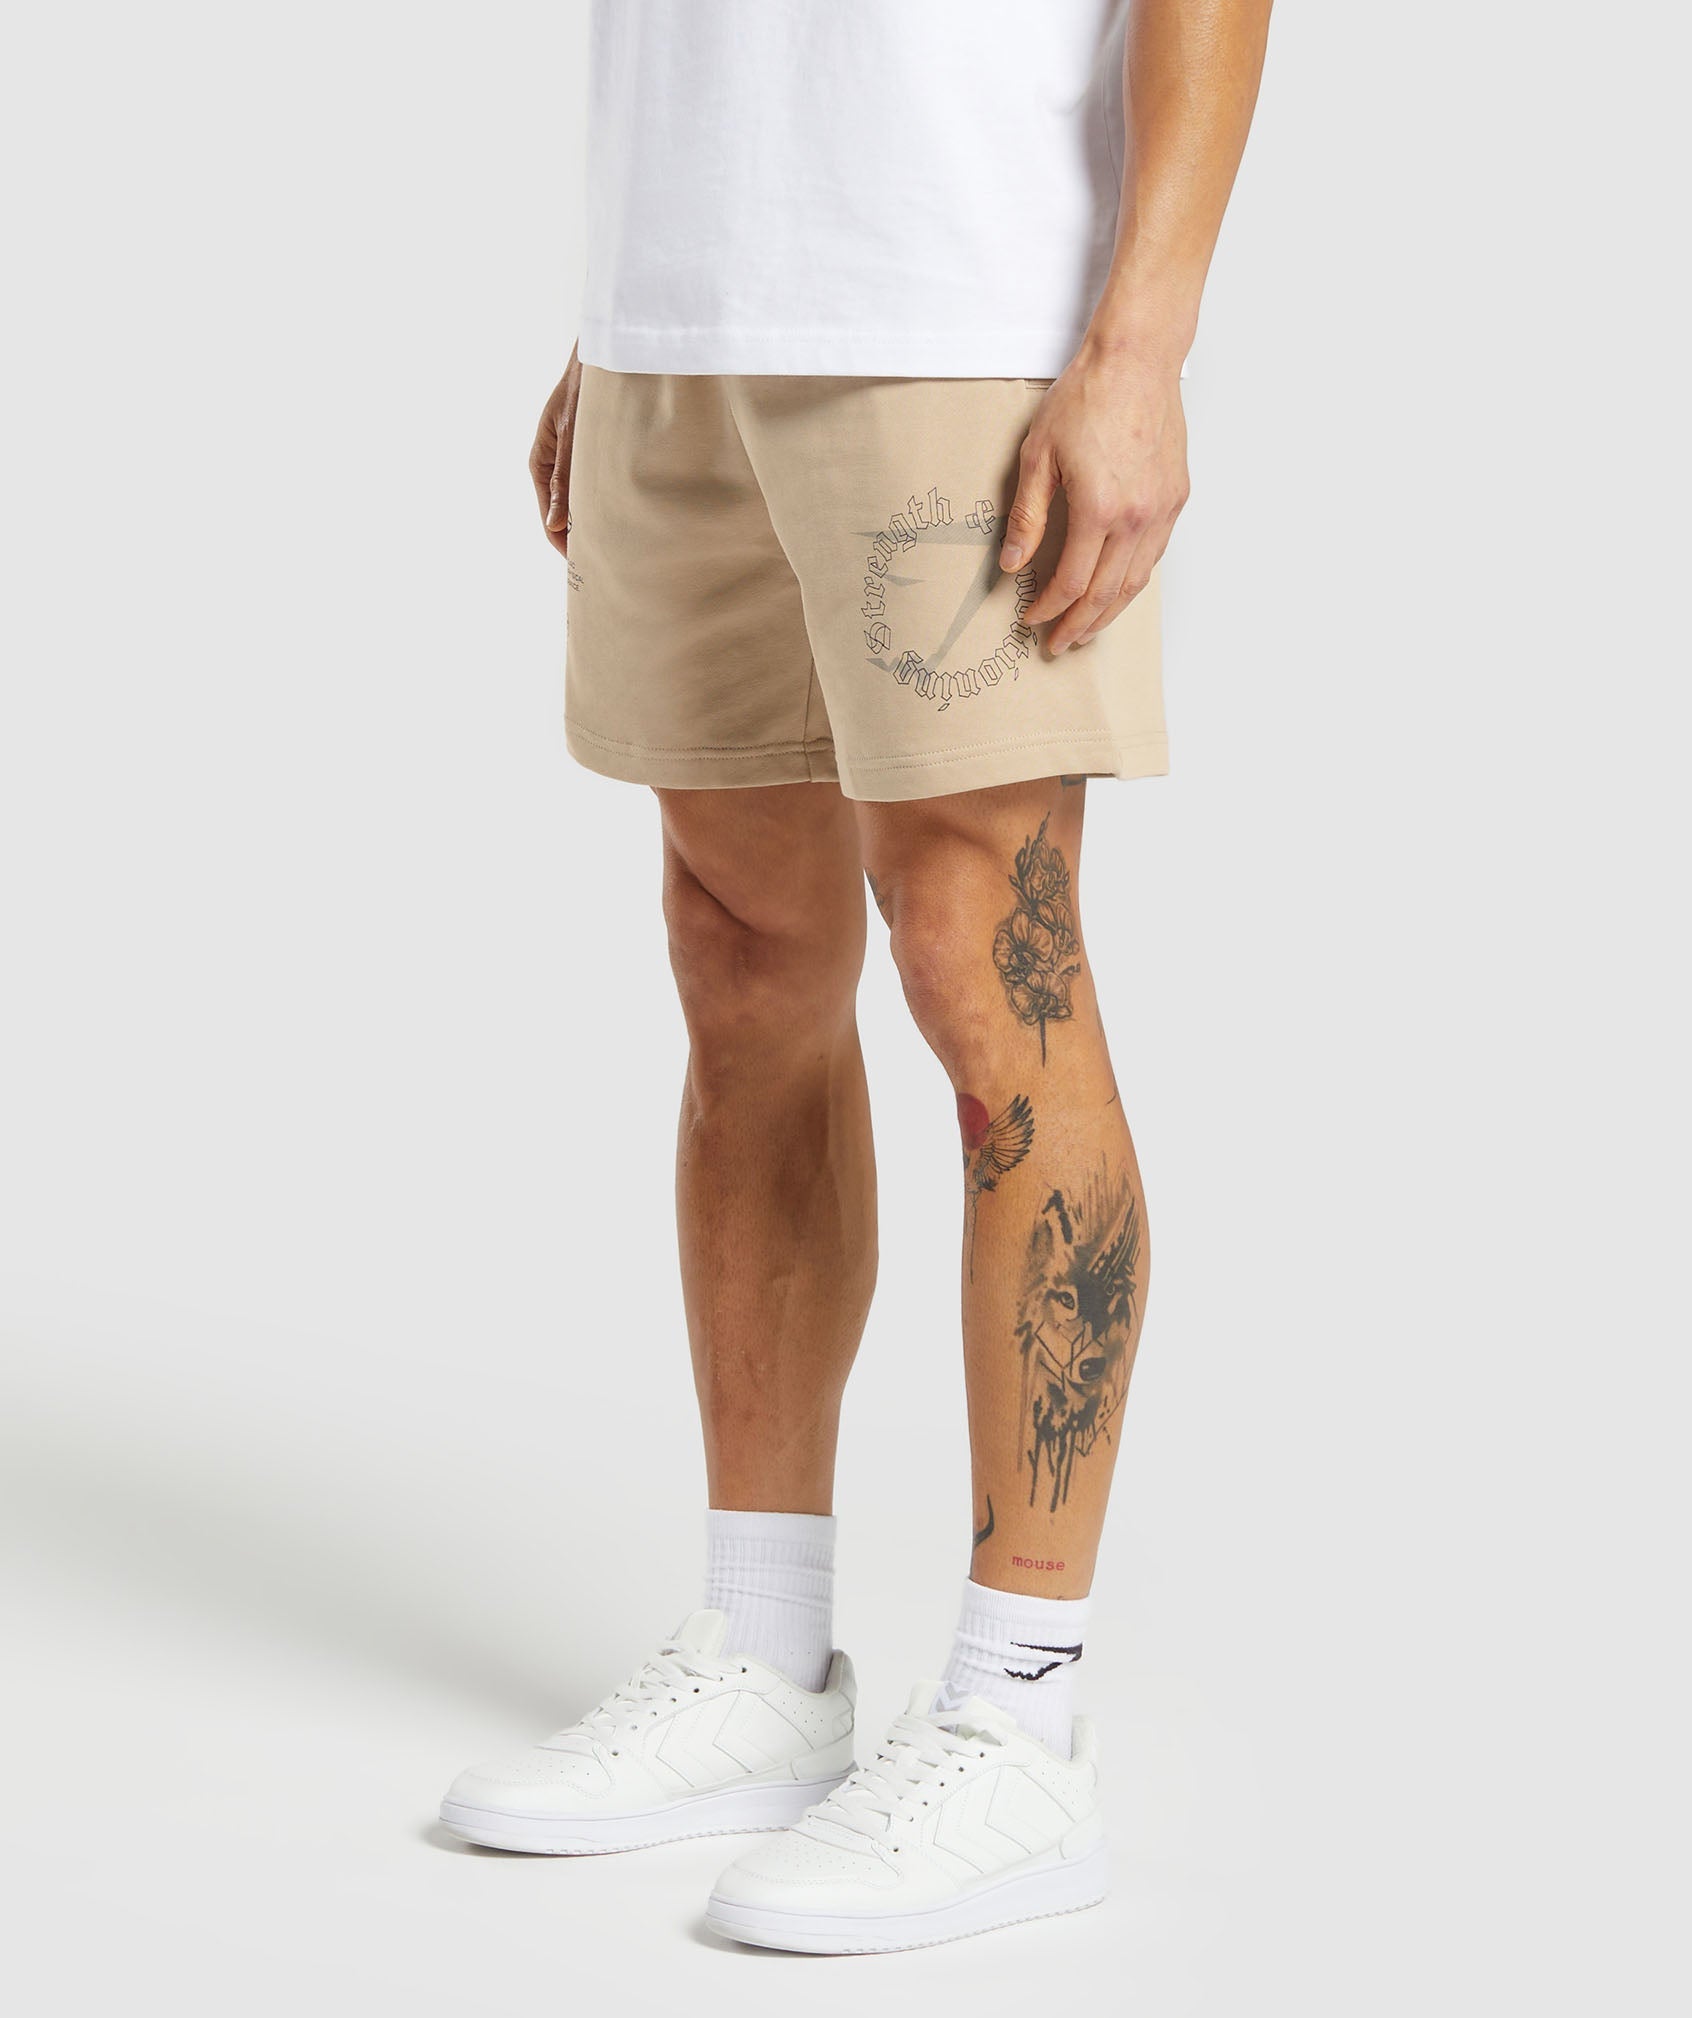 Strength and Conditioning 7" Shorts in Vanilla Beige - view 3